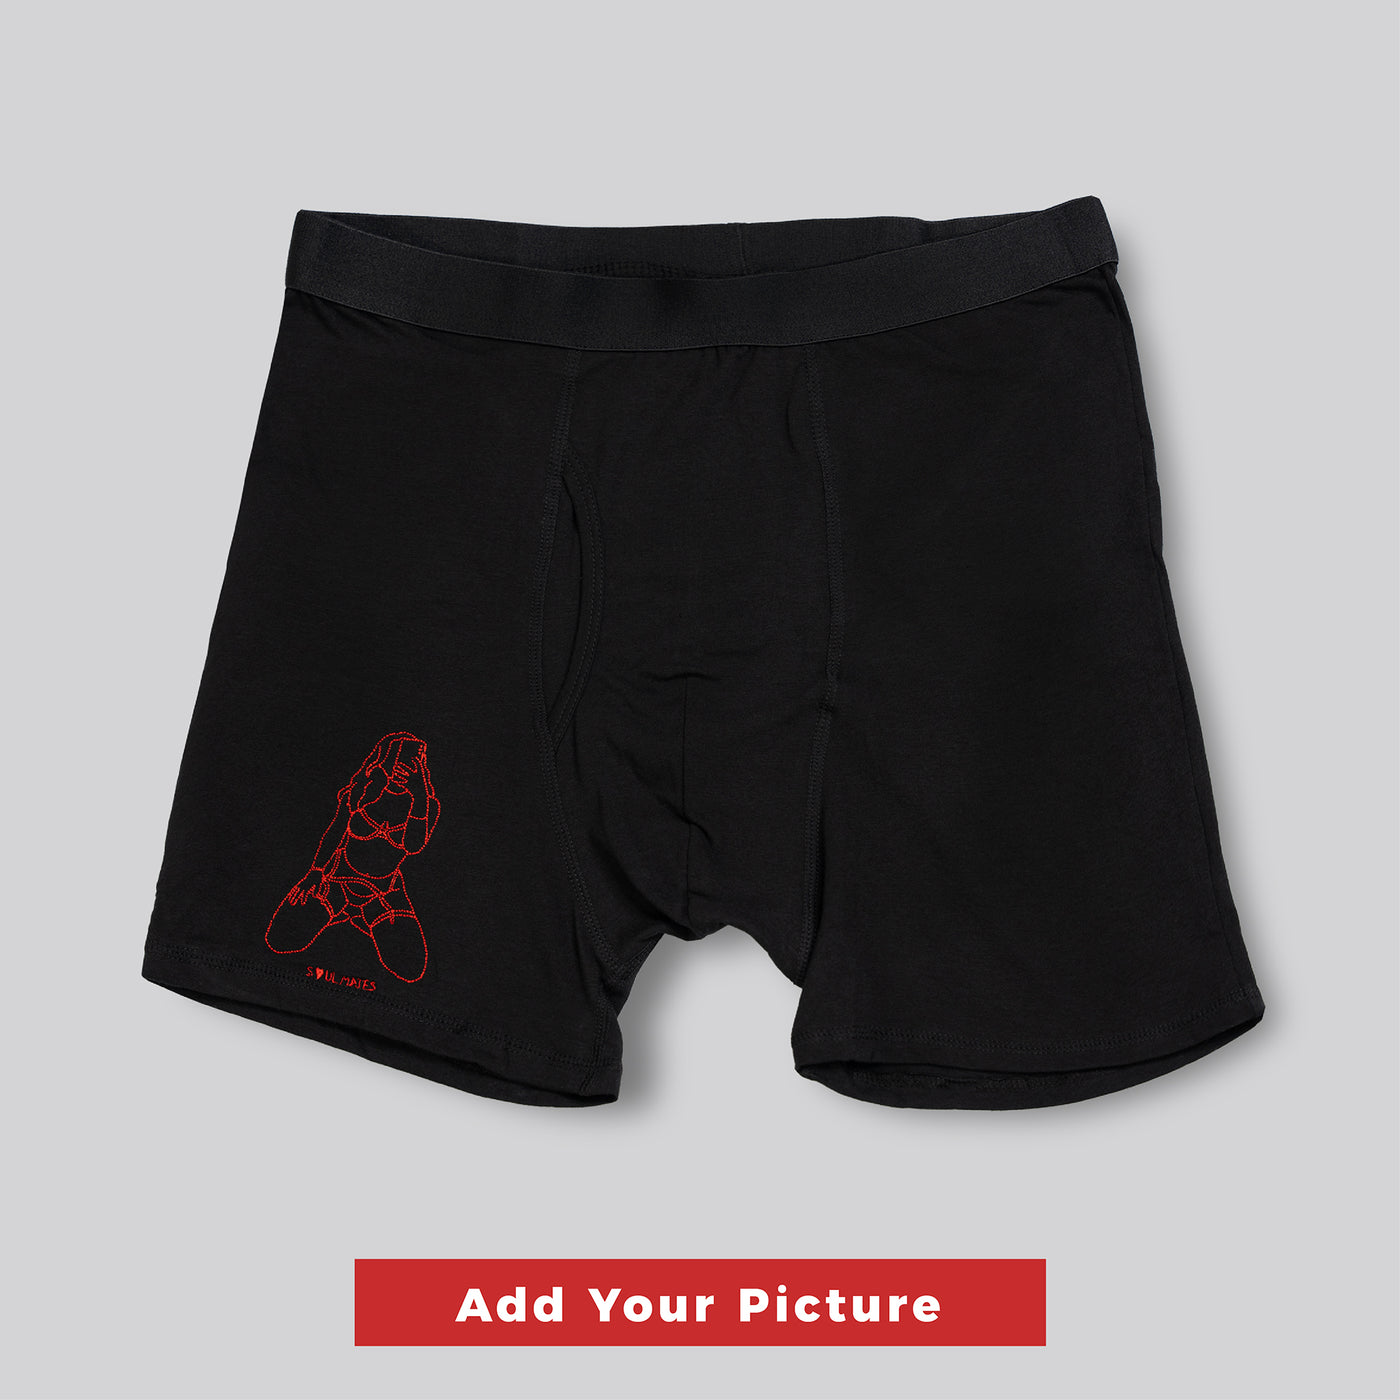 Embroidered Soulmate© Men's Underwear Boxers